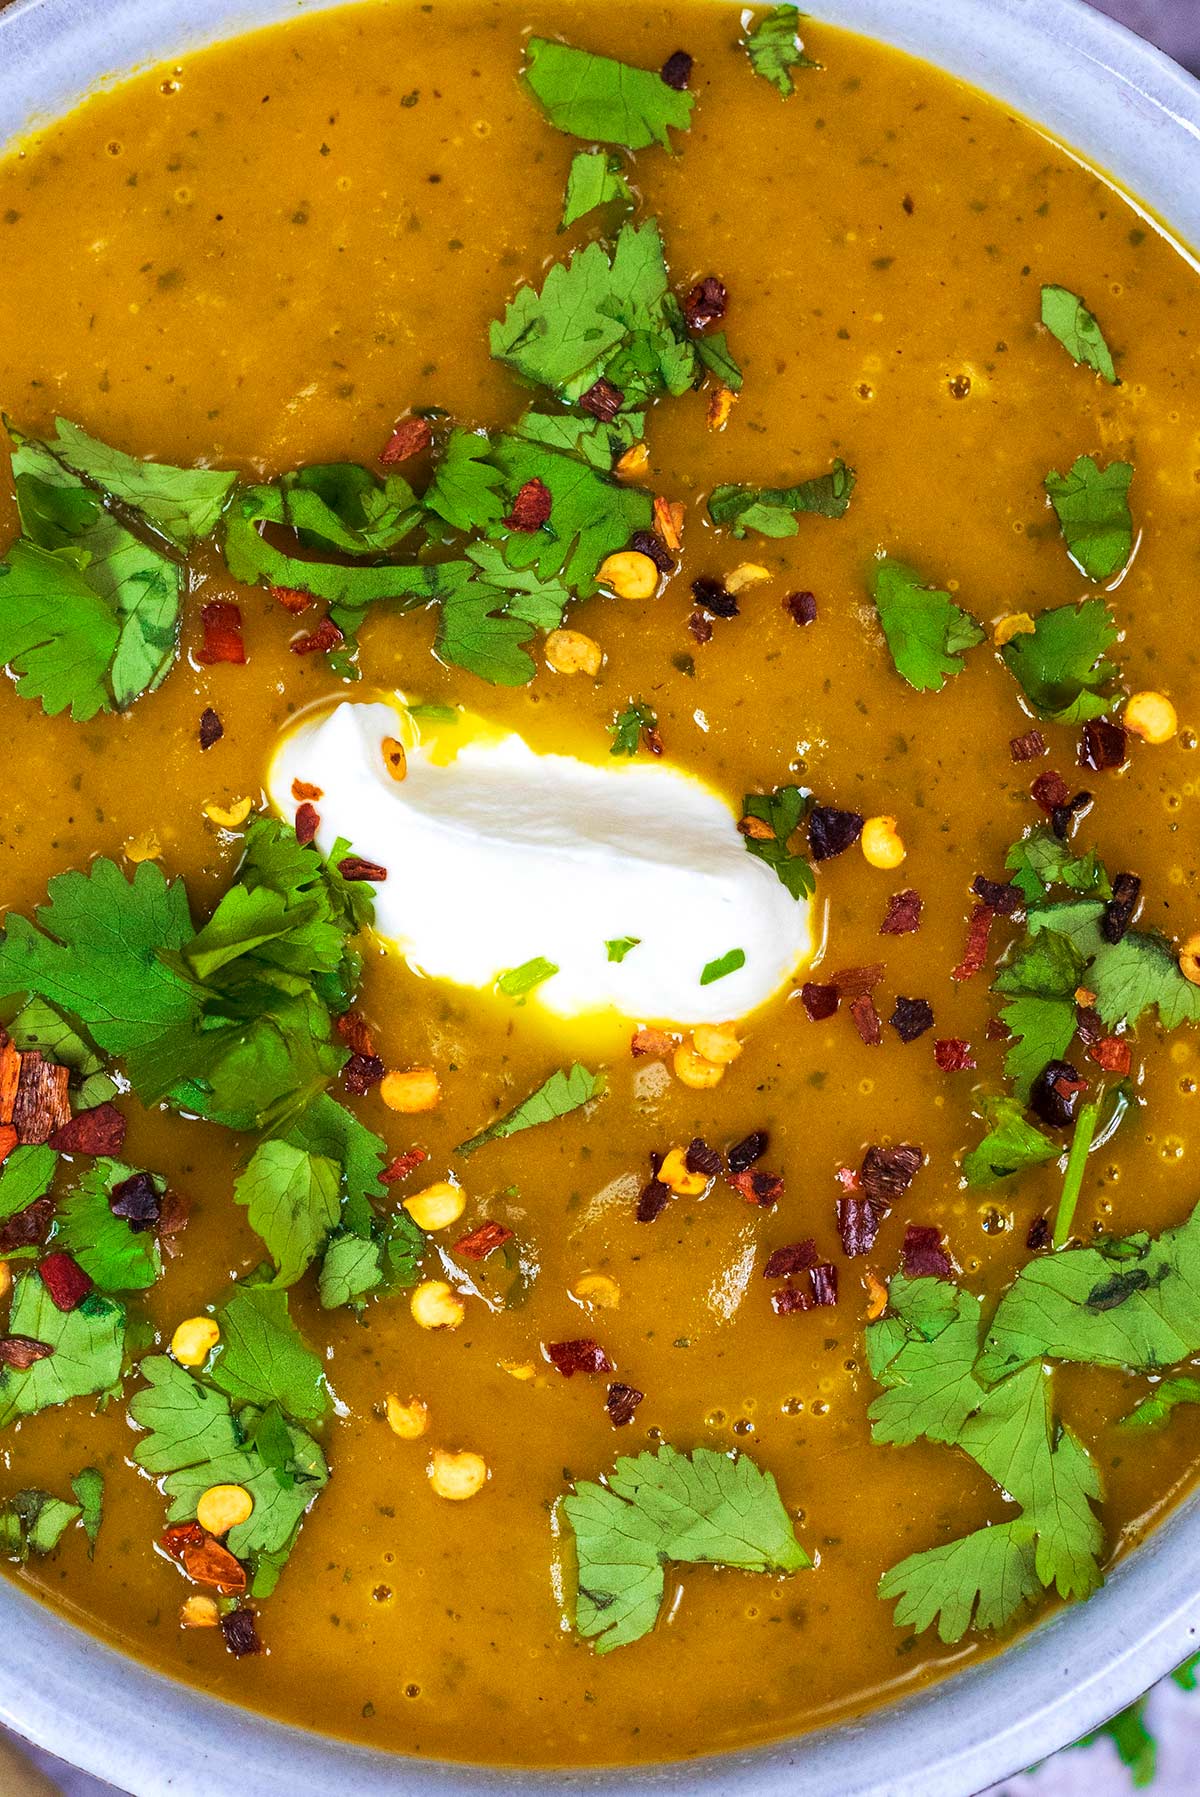 A bowl of soup topped with a dollop of cream, chopped coriander and chilli flakes.